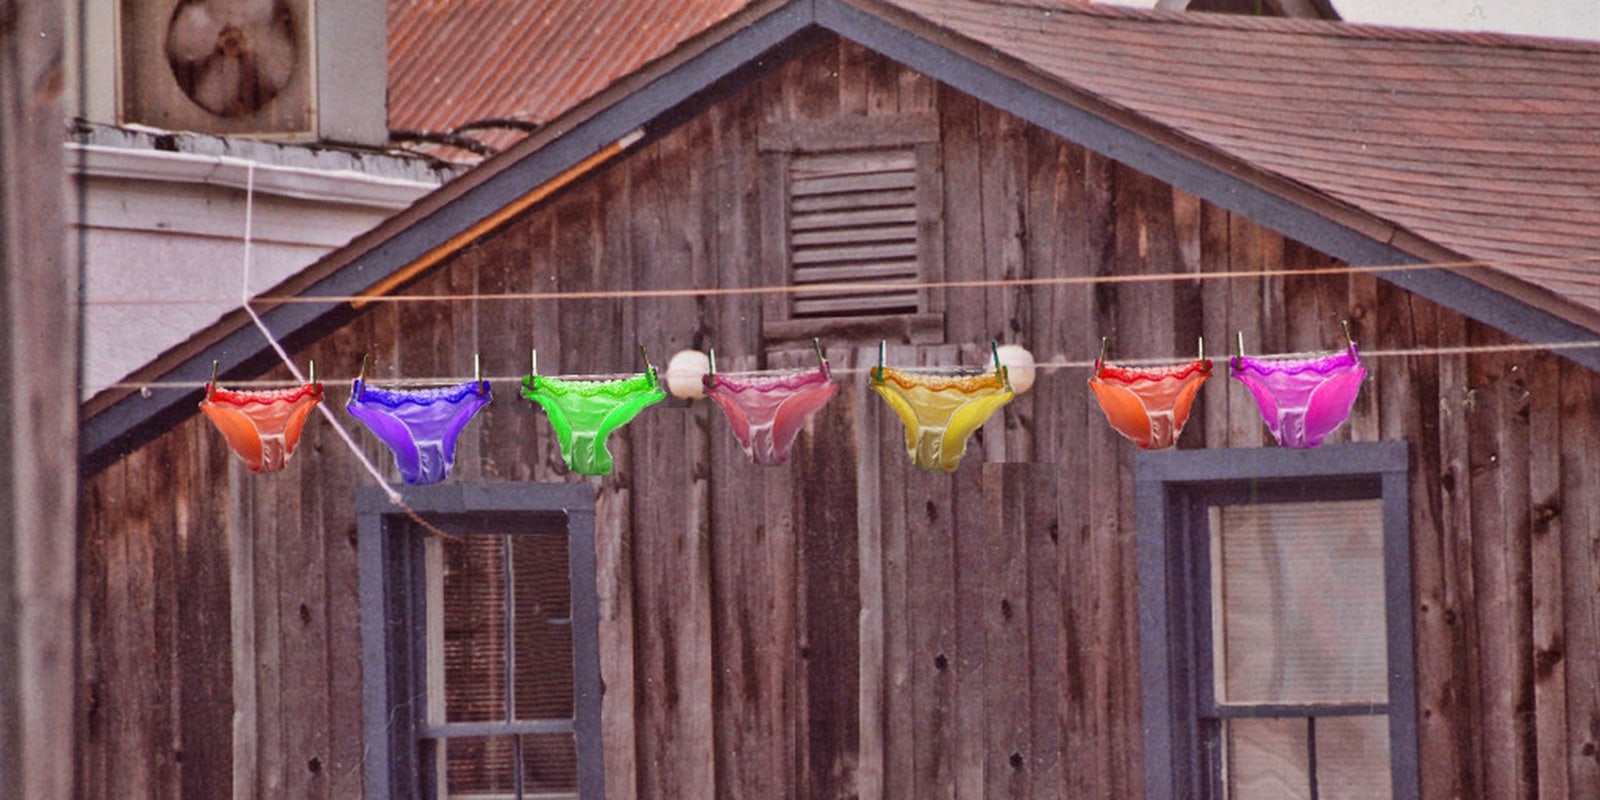 What it's like to sell your underwear to strangers on the Internet